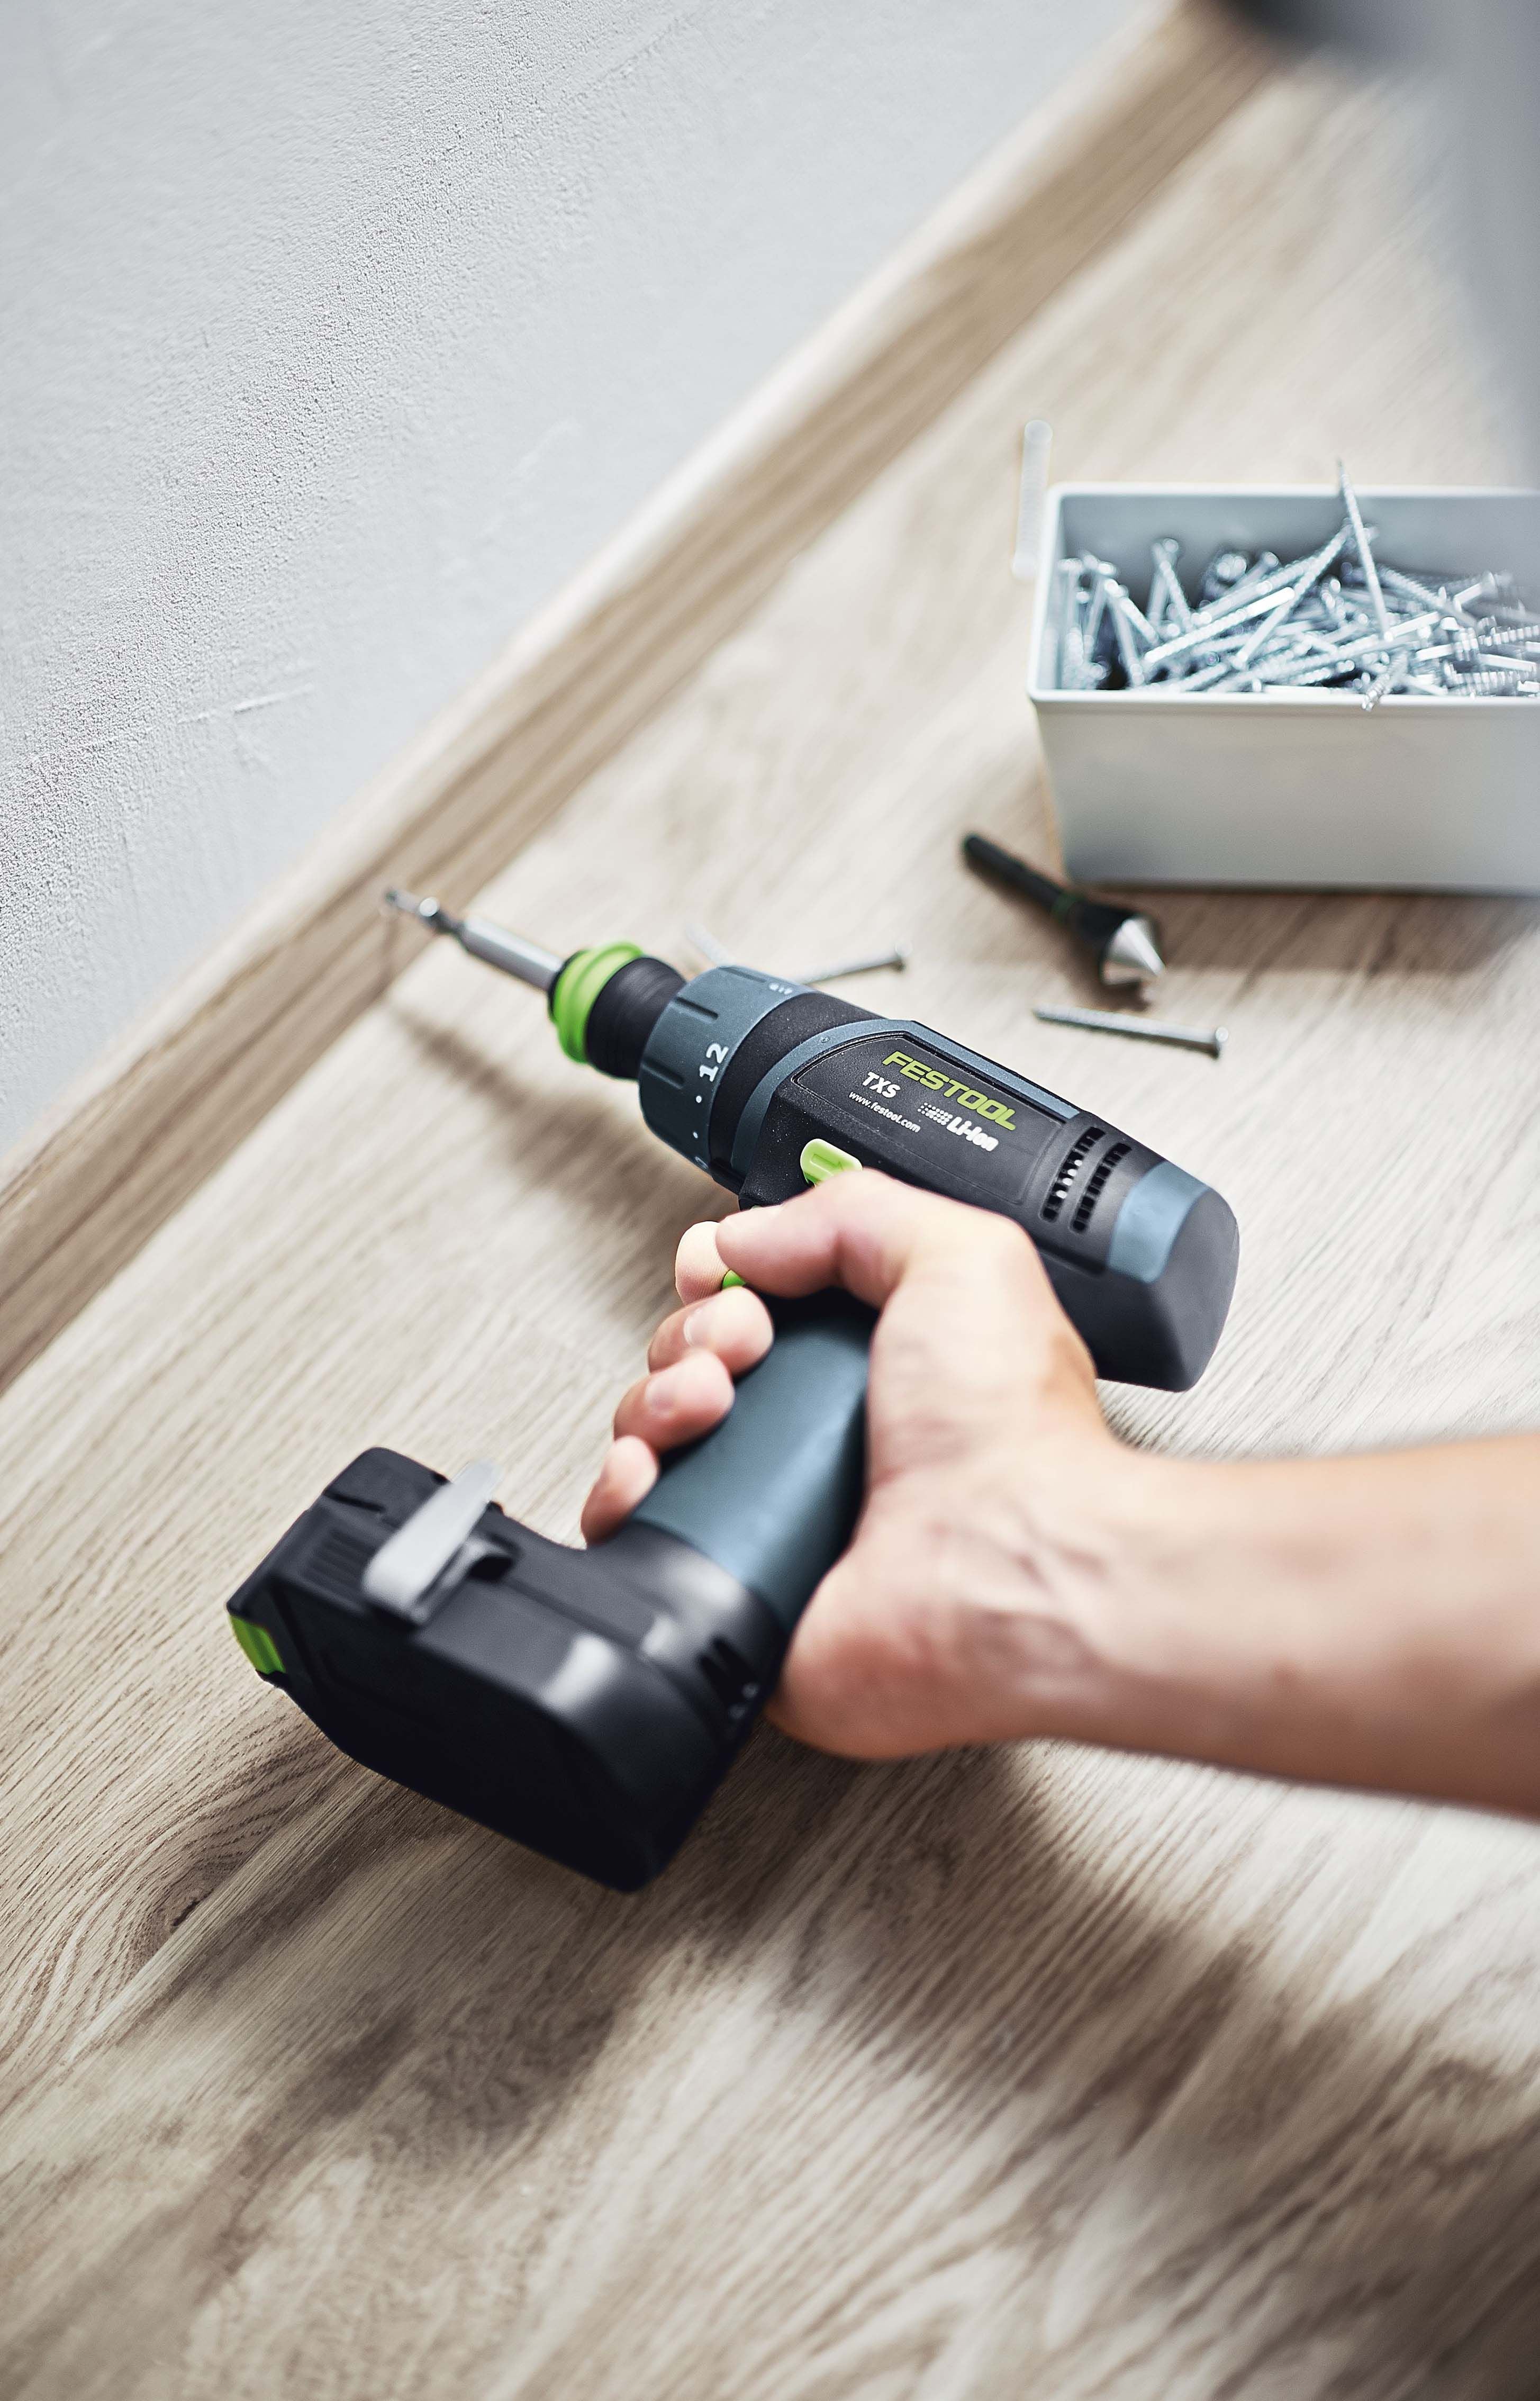 TXS 10.8V Mini Cordless Drill 2.6Ah Set in Systainer 576104 by Festool